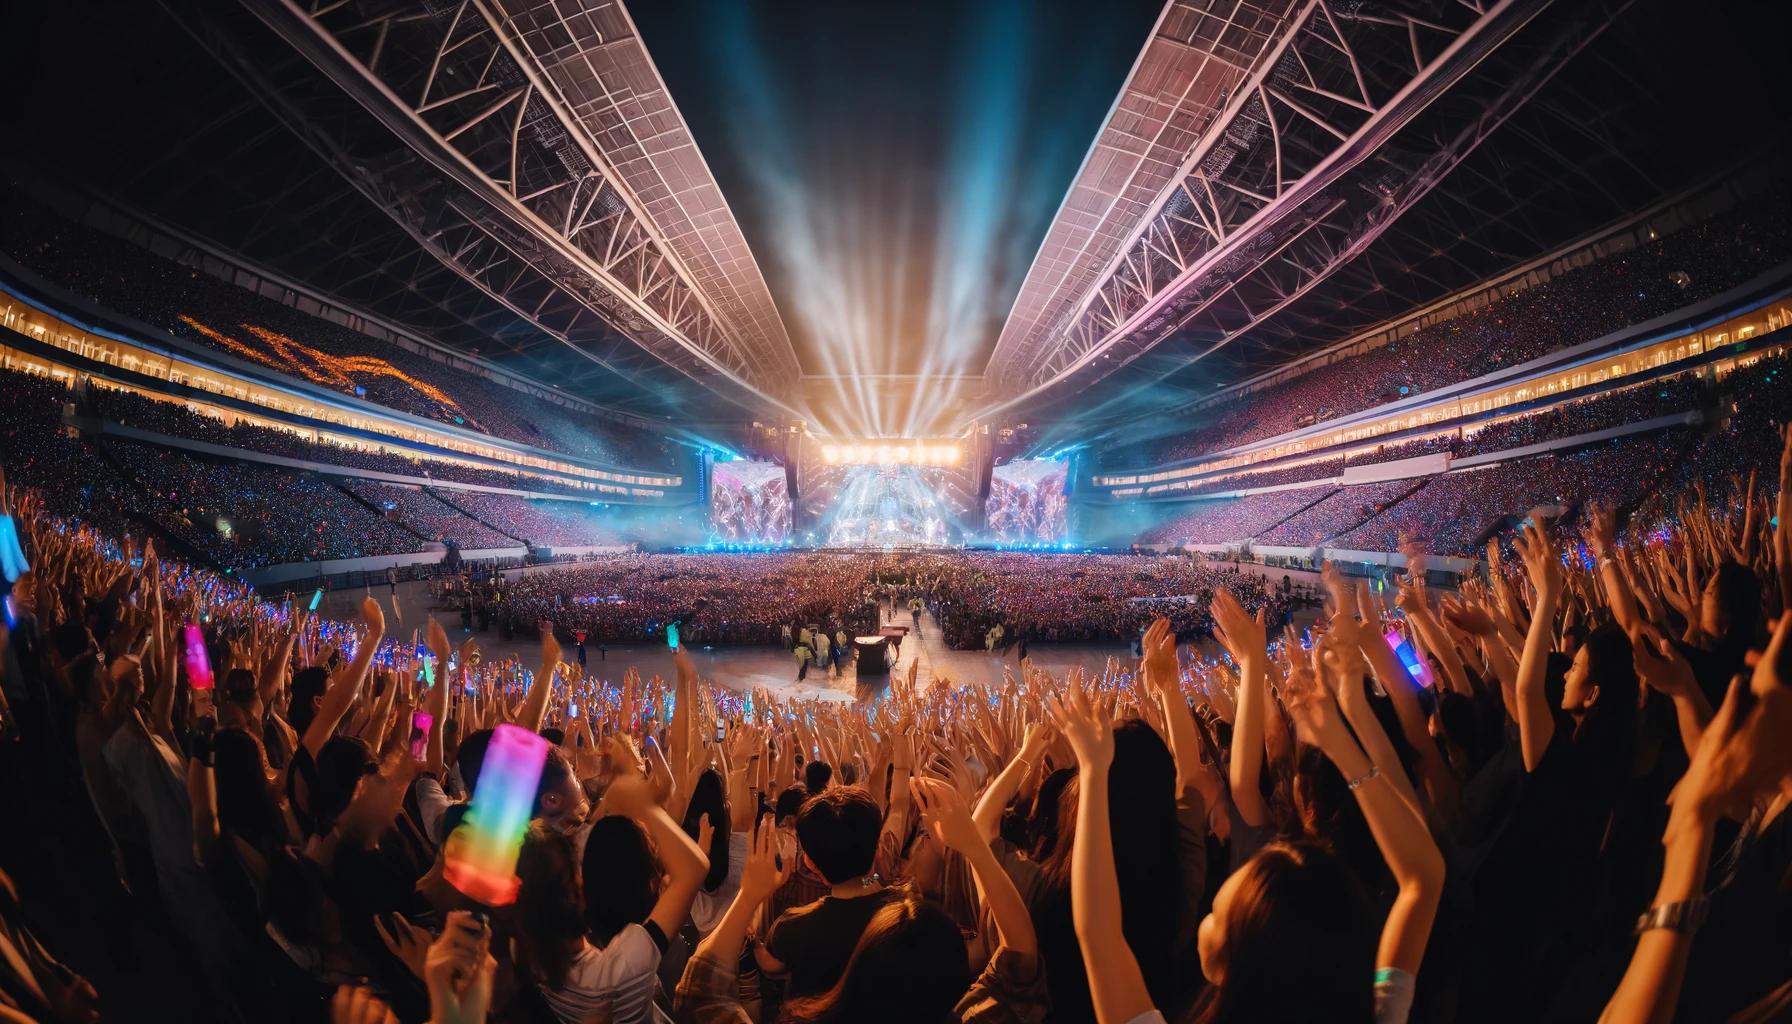 https://media.zequiz.com/2024/06/DALL·E-2024-06-18-23.39.03-A-wide-angle-view-of-a-large-crowd-in-a-stadium-during-a-concert.-The-stadium-is-filled-with-enthusiastic-fans-waving-their-hands-holding-glow-stick.webp